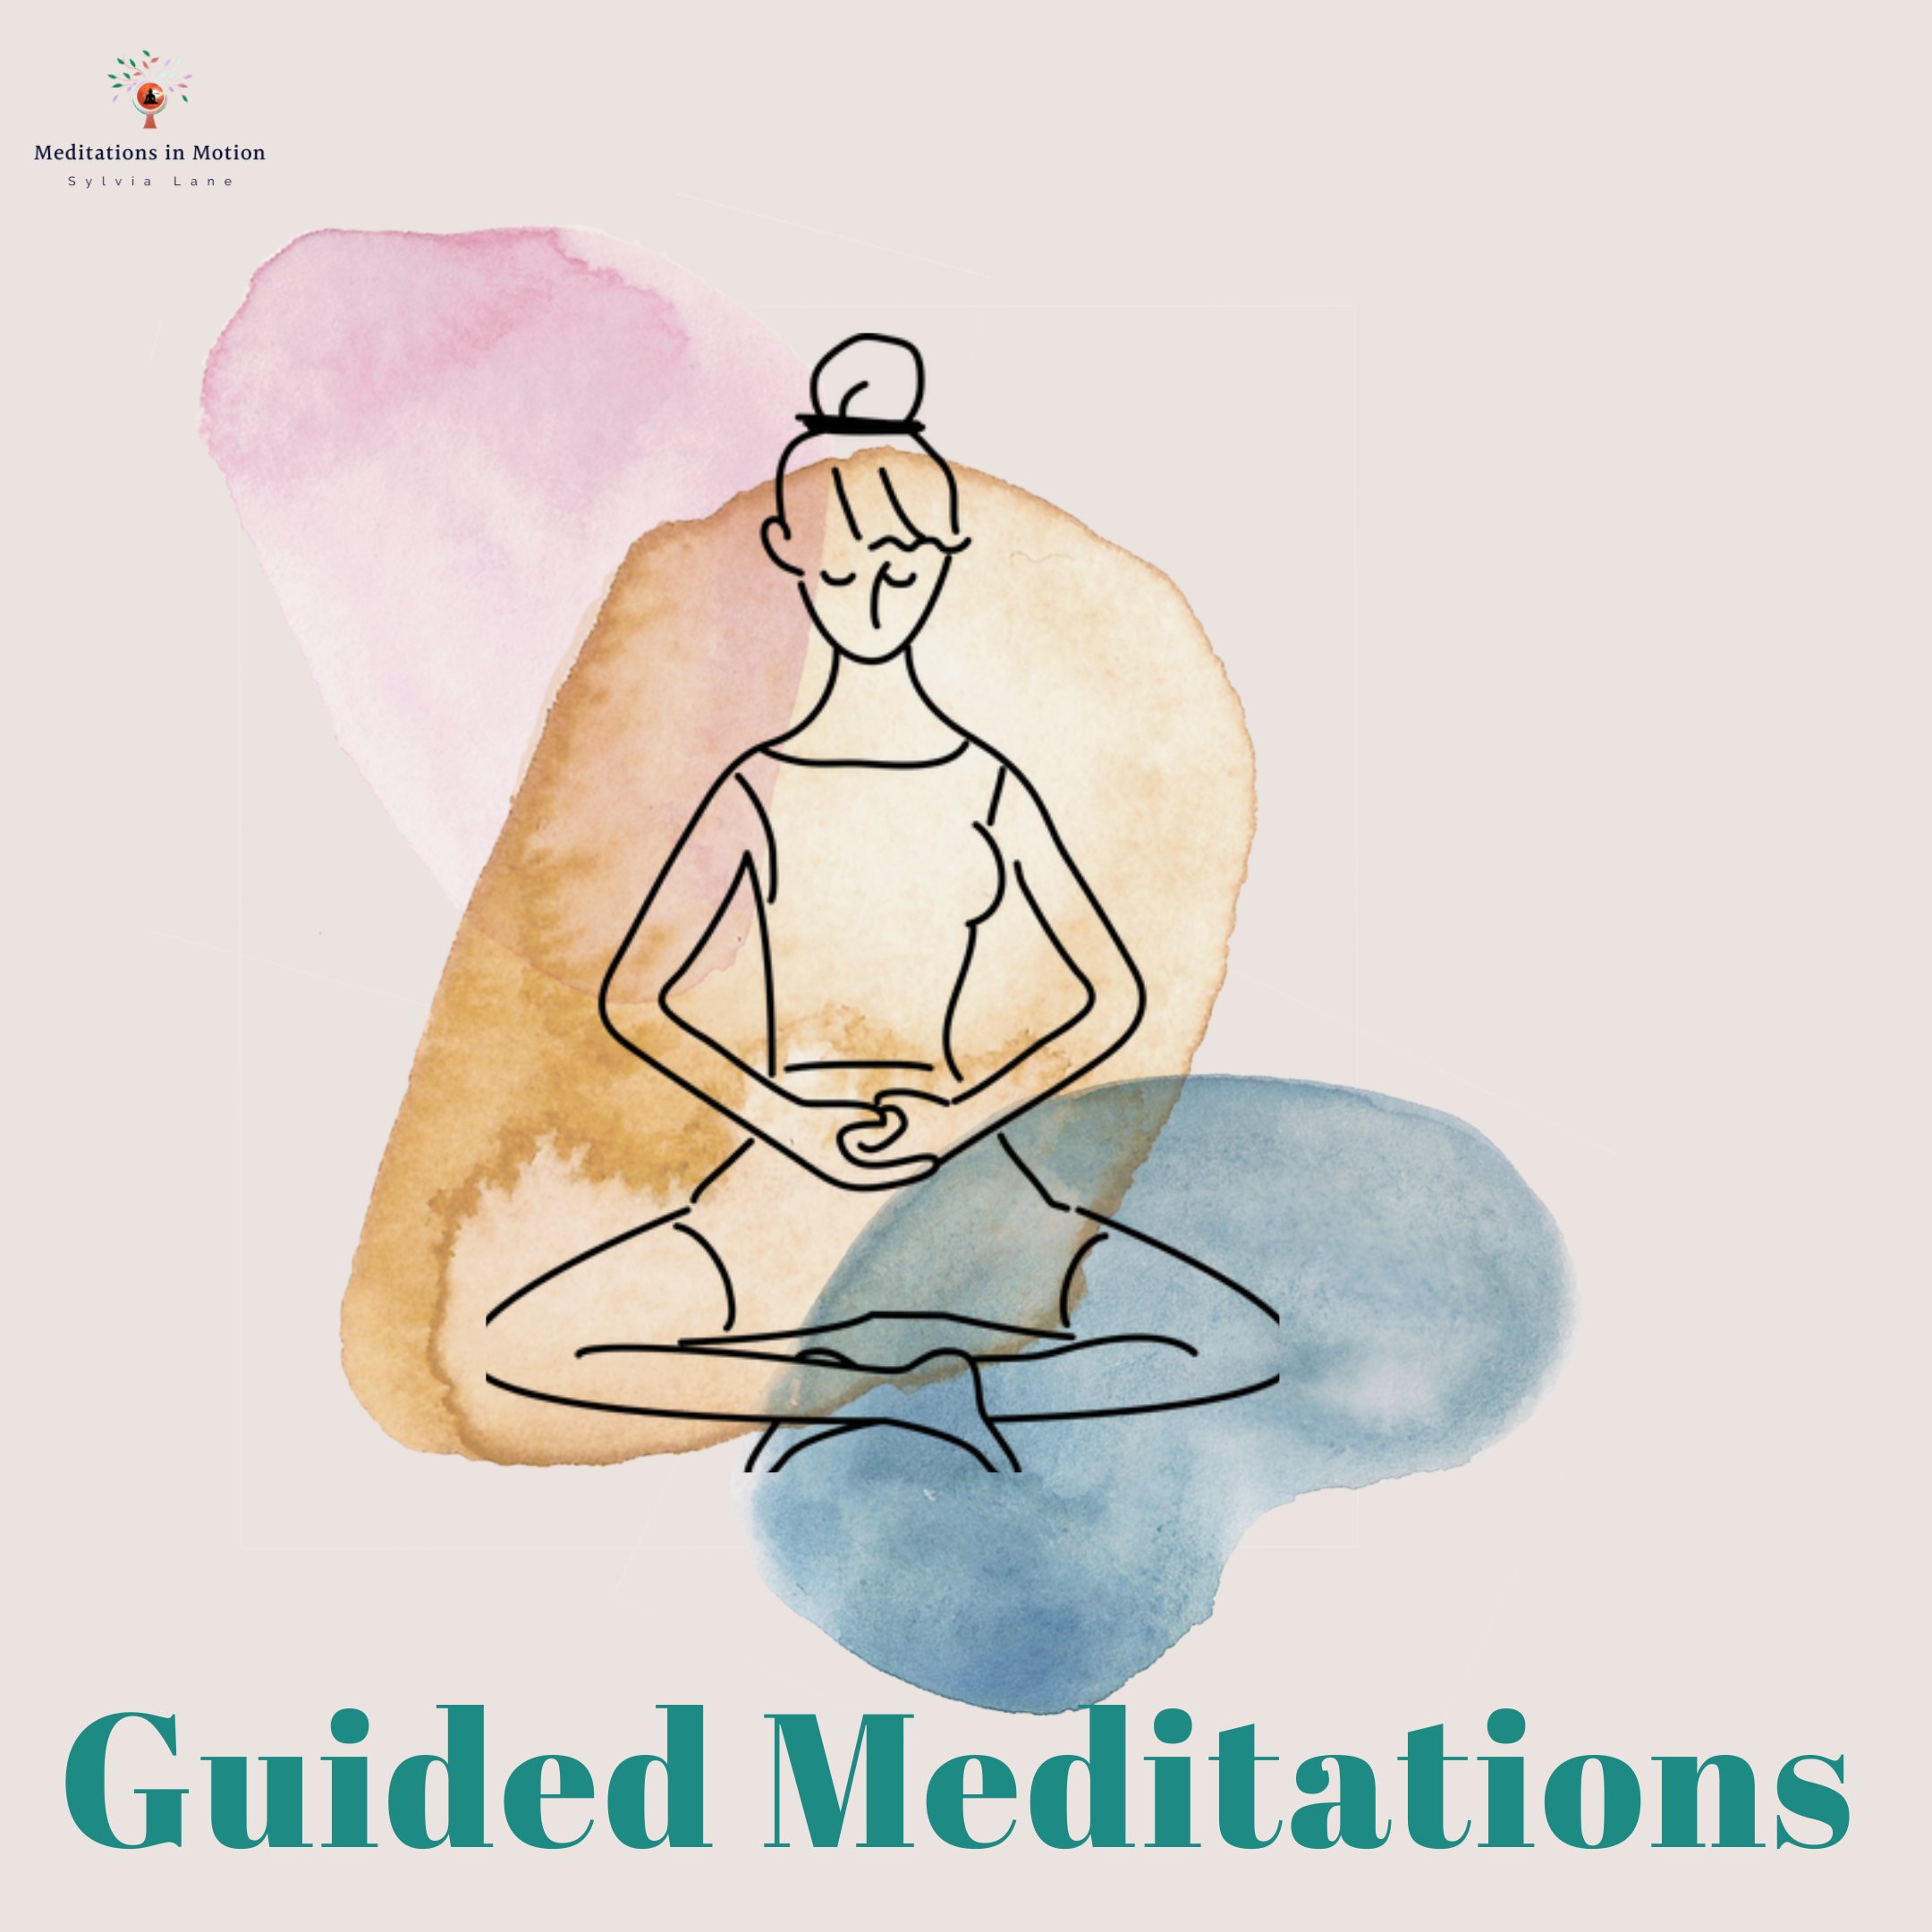 Guided meditations